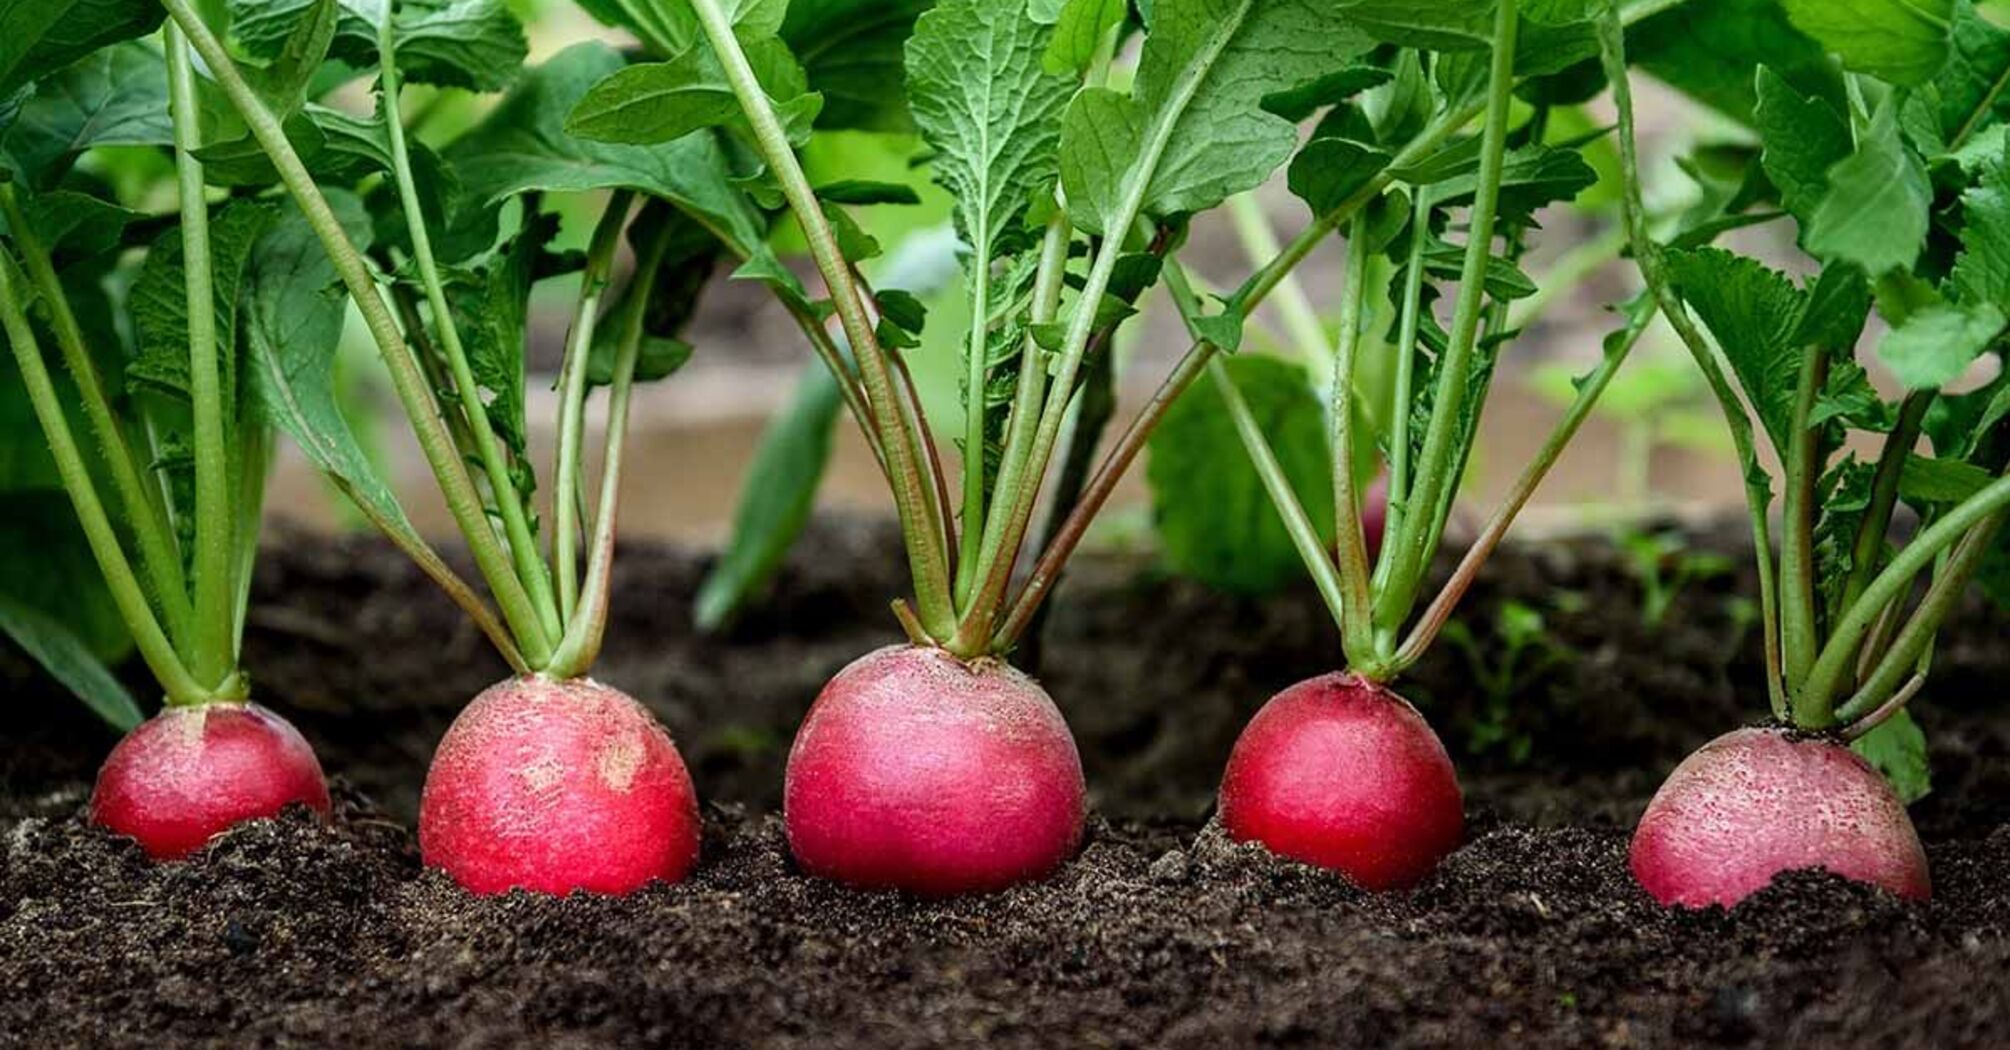 How to grow radishes sweet and strong